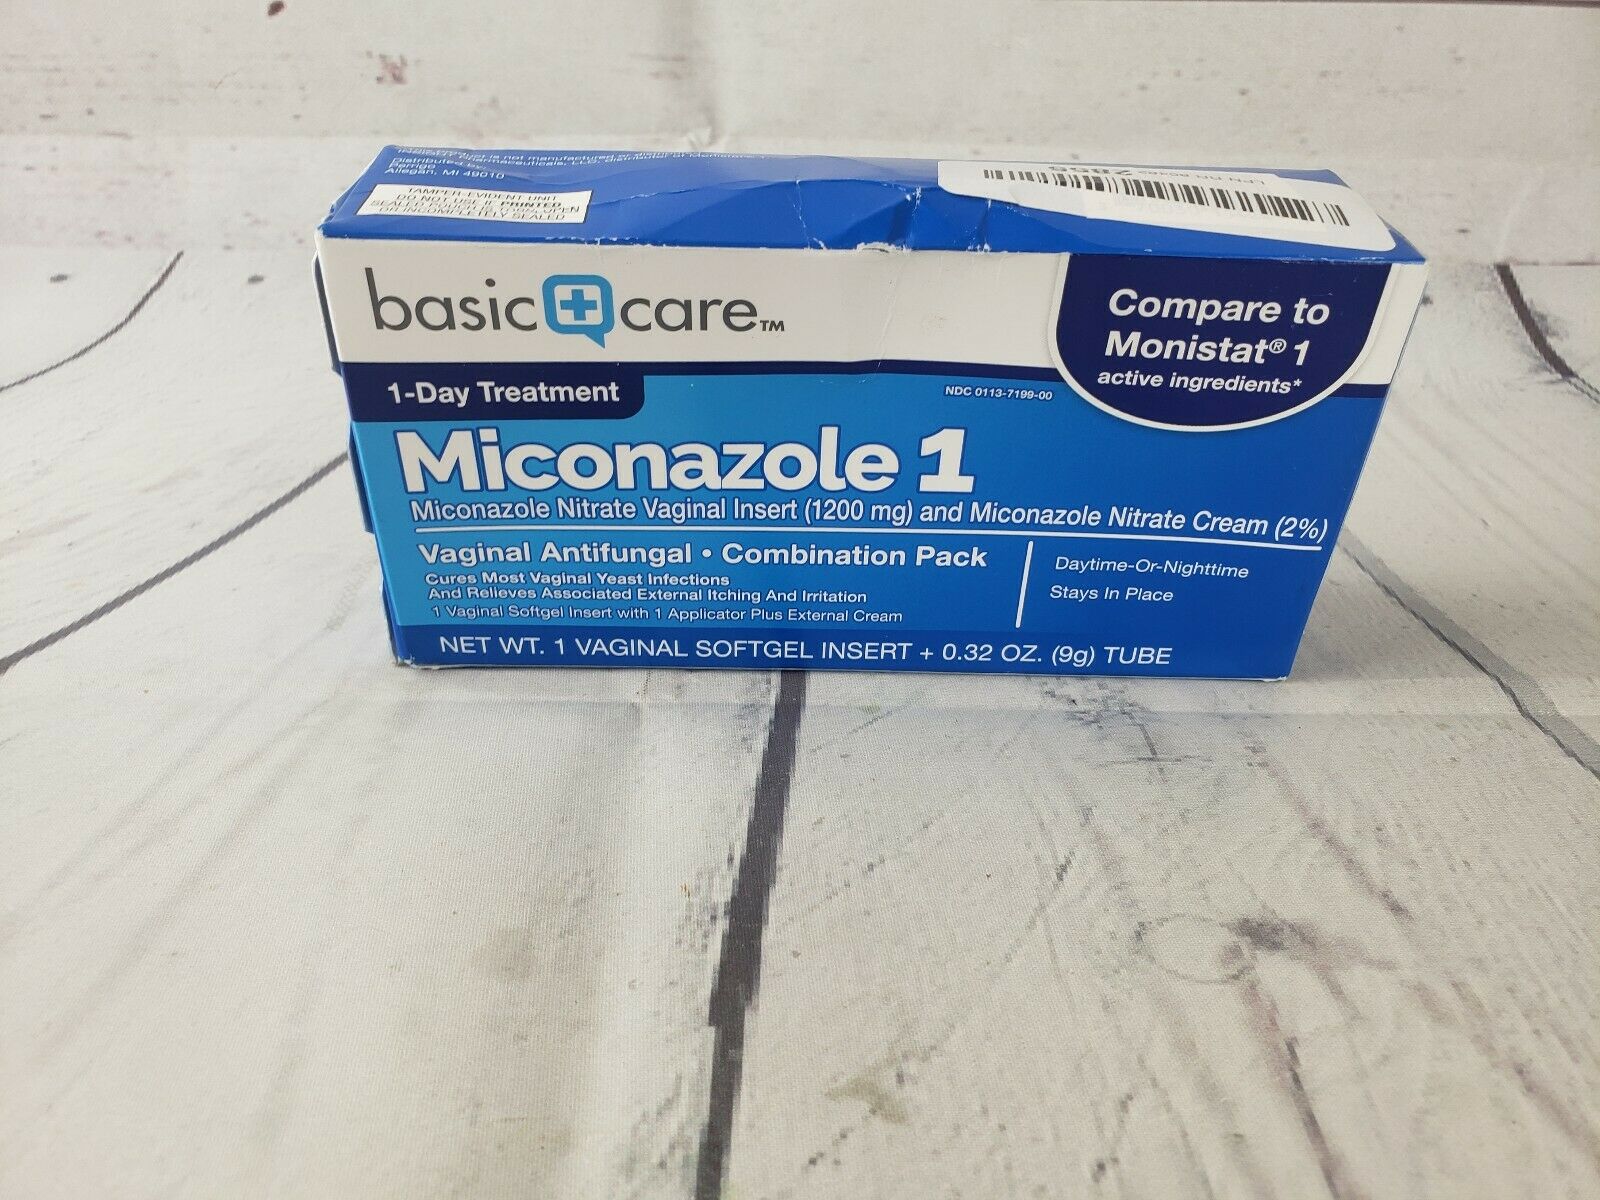 Miconazole Nitrate L Insert (1200 Mg) And Miconazole Nitrate Cream -ee5-